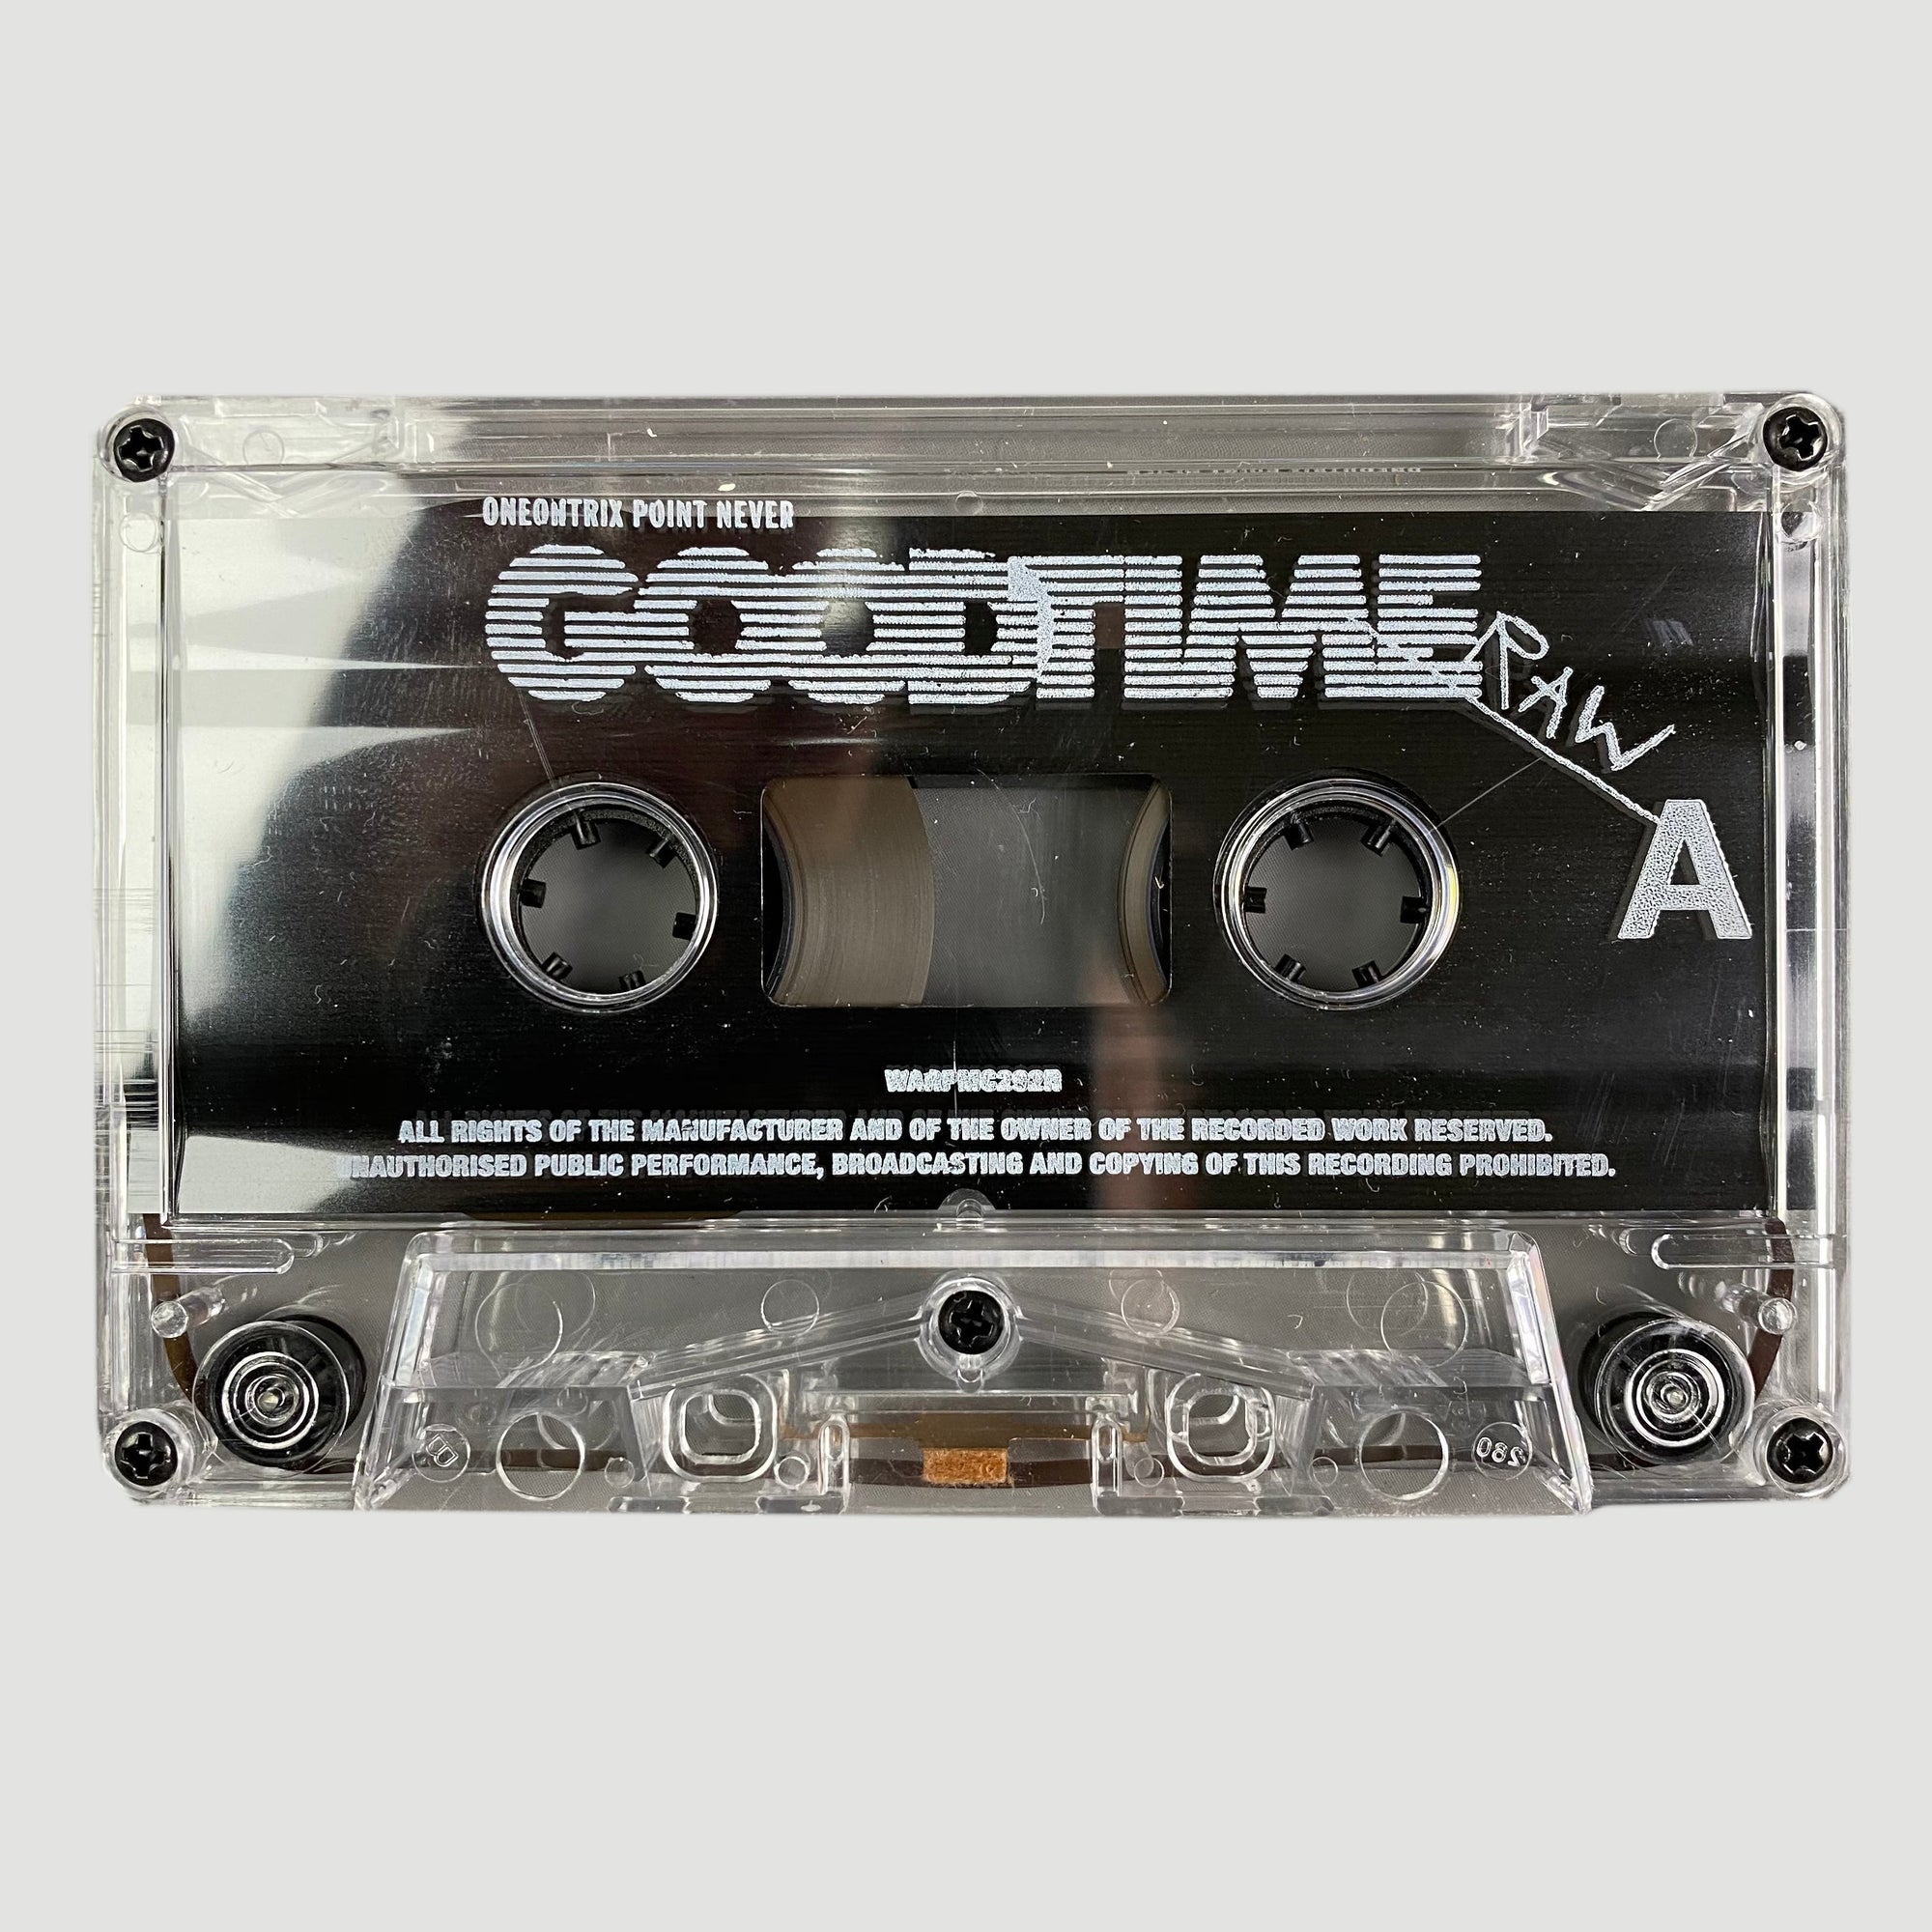 2017 Oneohtrix Point Never ‎'Good Time Raw' Cassette